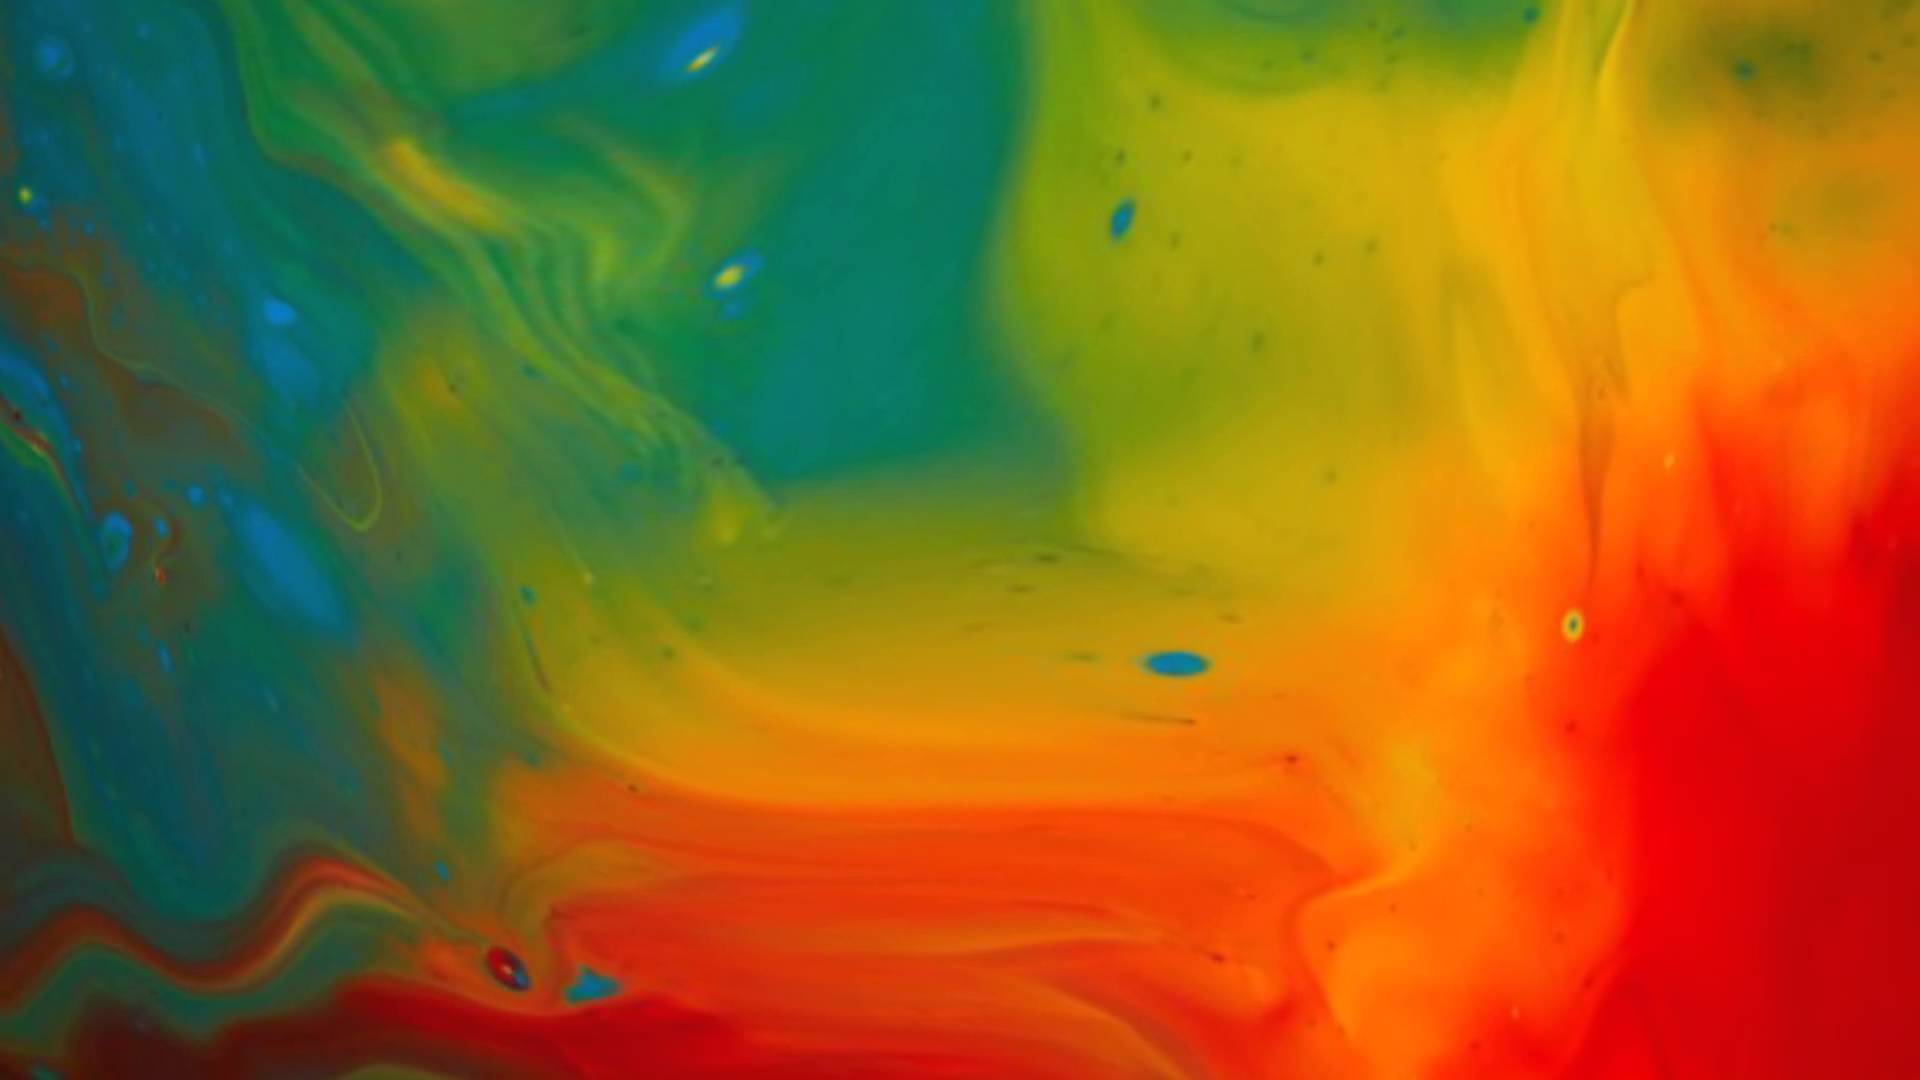 FREE VIDEO BACKGROUND GRAPHICS - Liquid Paint - YouTube